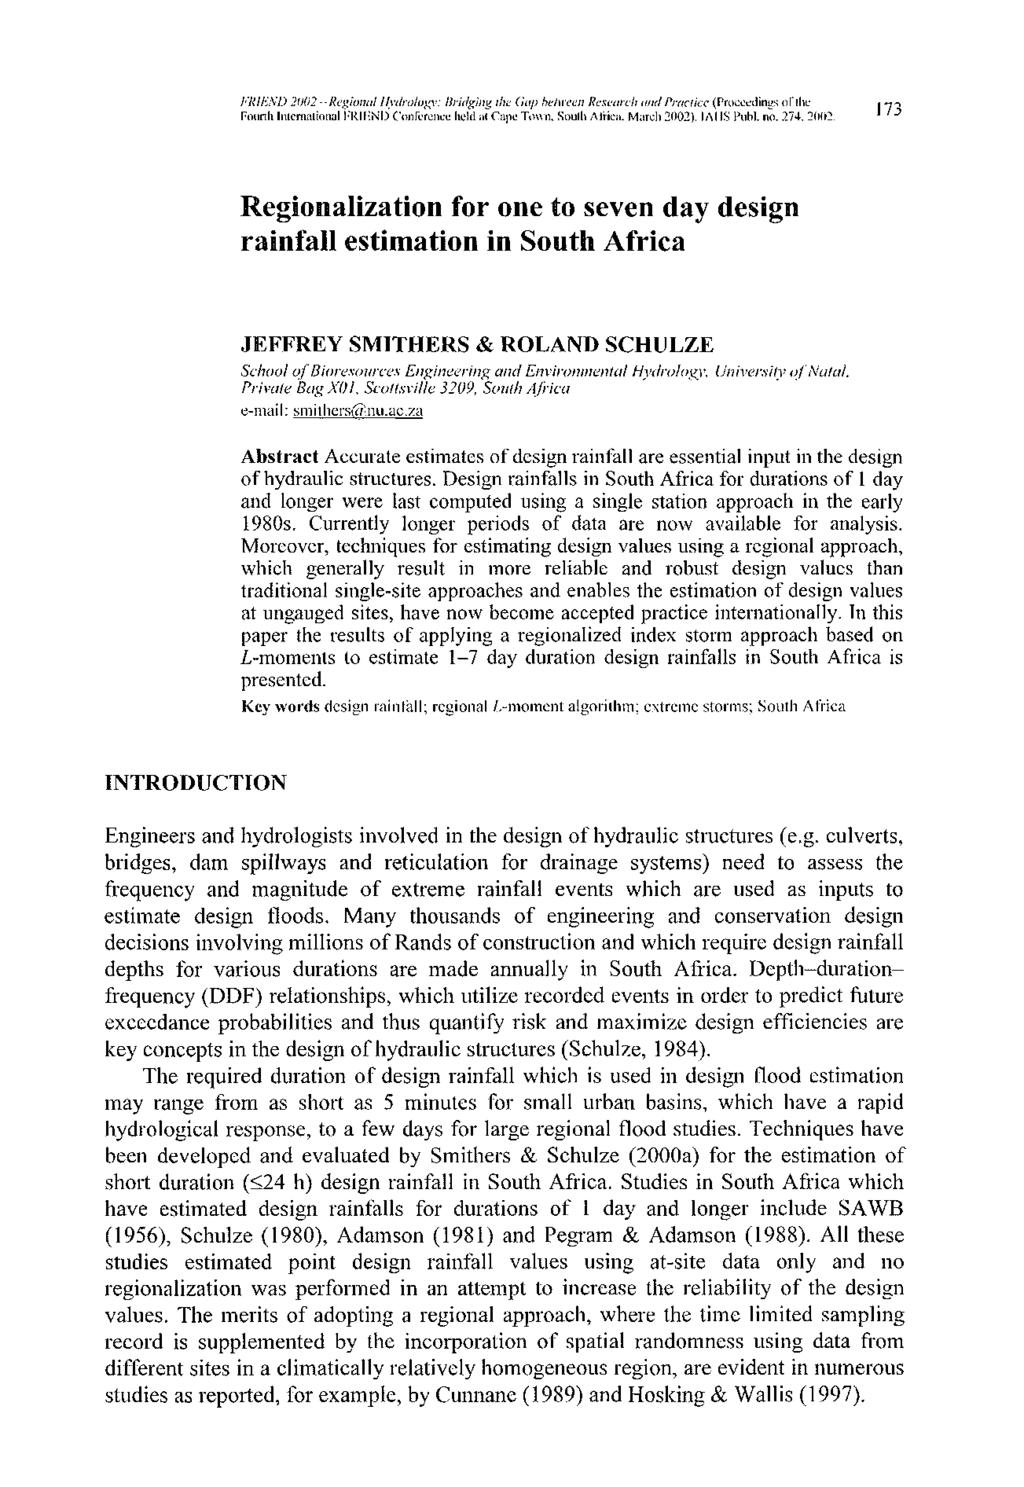 FRIEND 2002 Regional Hydrology: Bridging the Gap between Research and Practice (Proceedings of (he fourth International l-'riknd Conference held at Cape Town. South Africa. March 2002). IAI IS Publ.